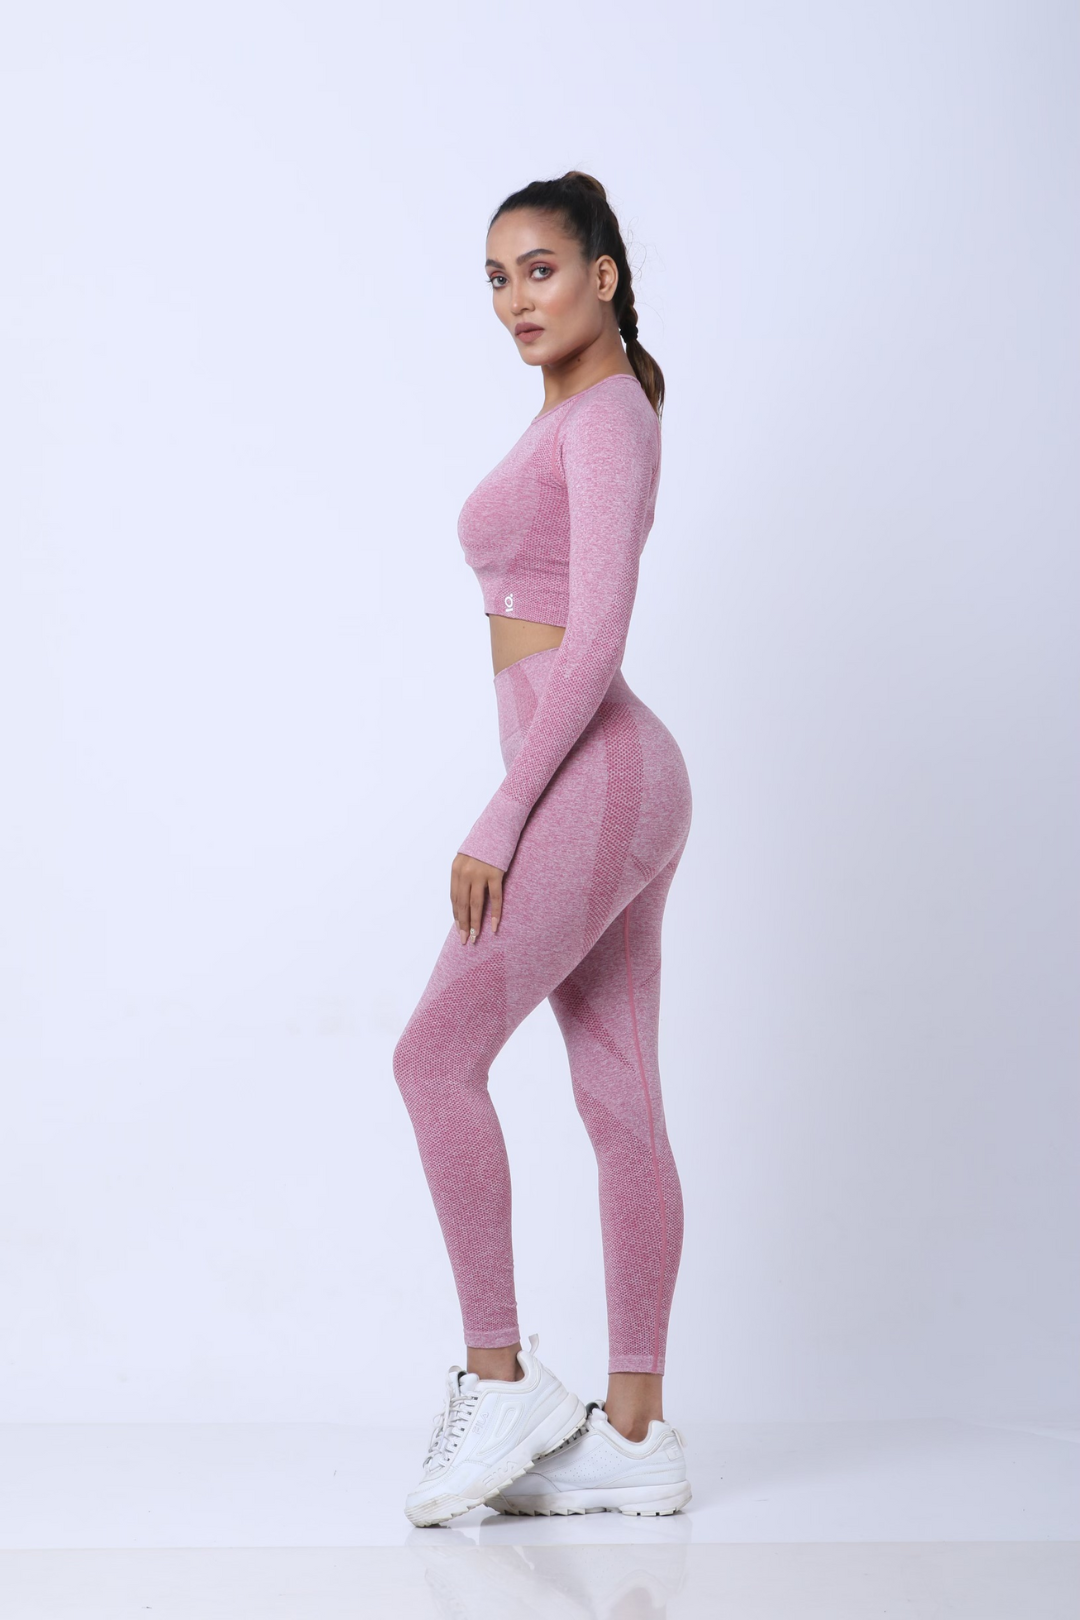 Women's Seamless Pink Workout Outfit with Long Sleeve and Legging